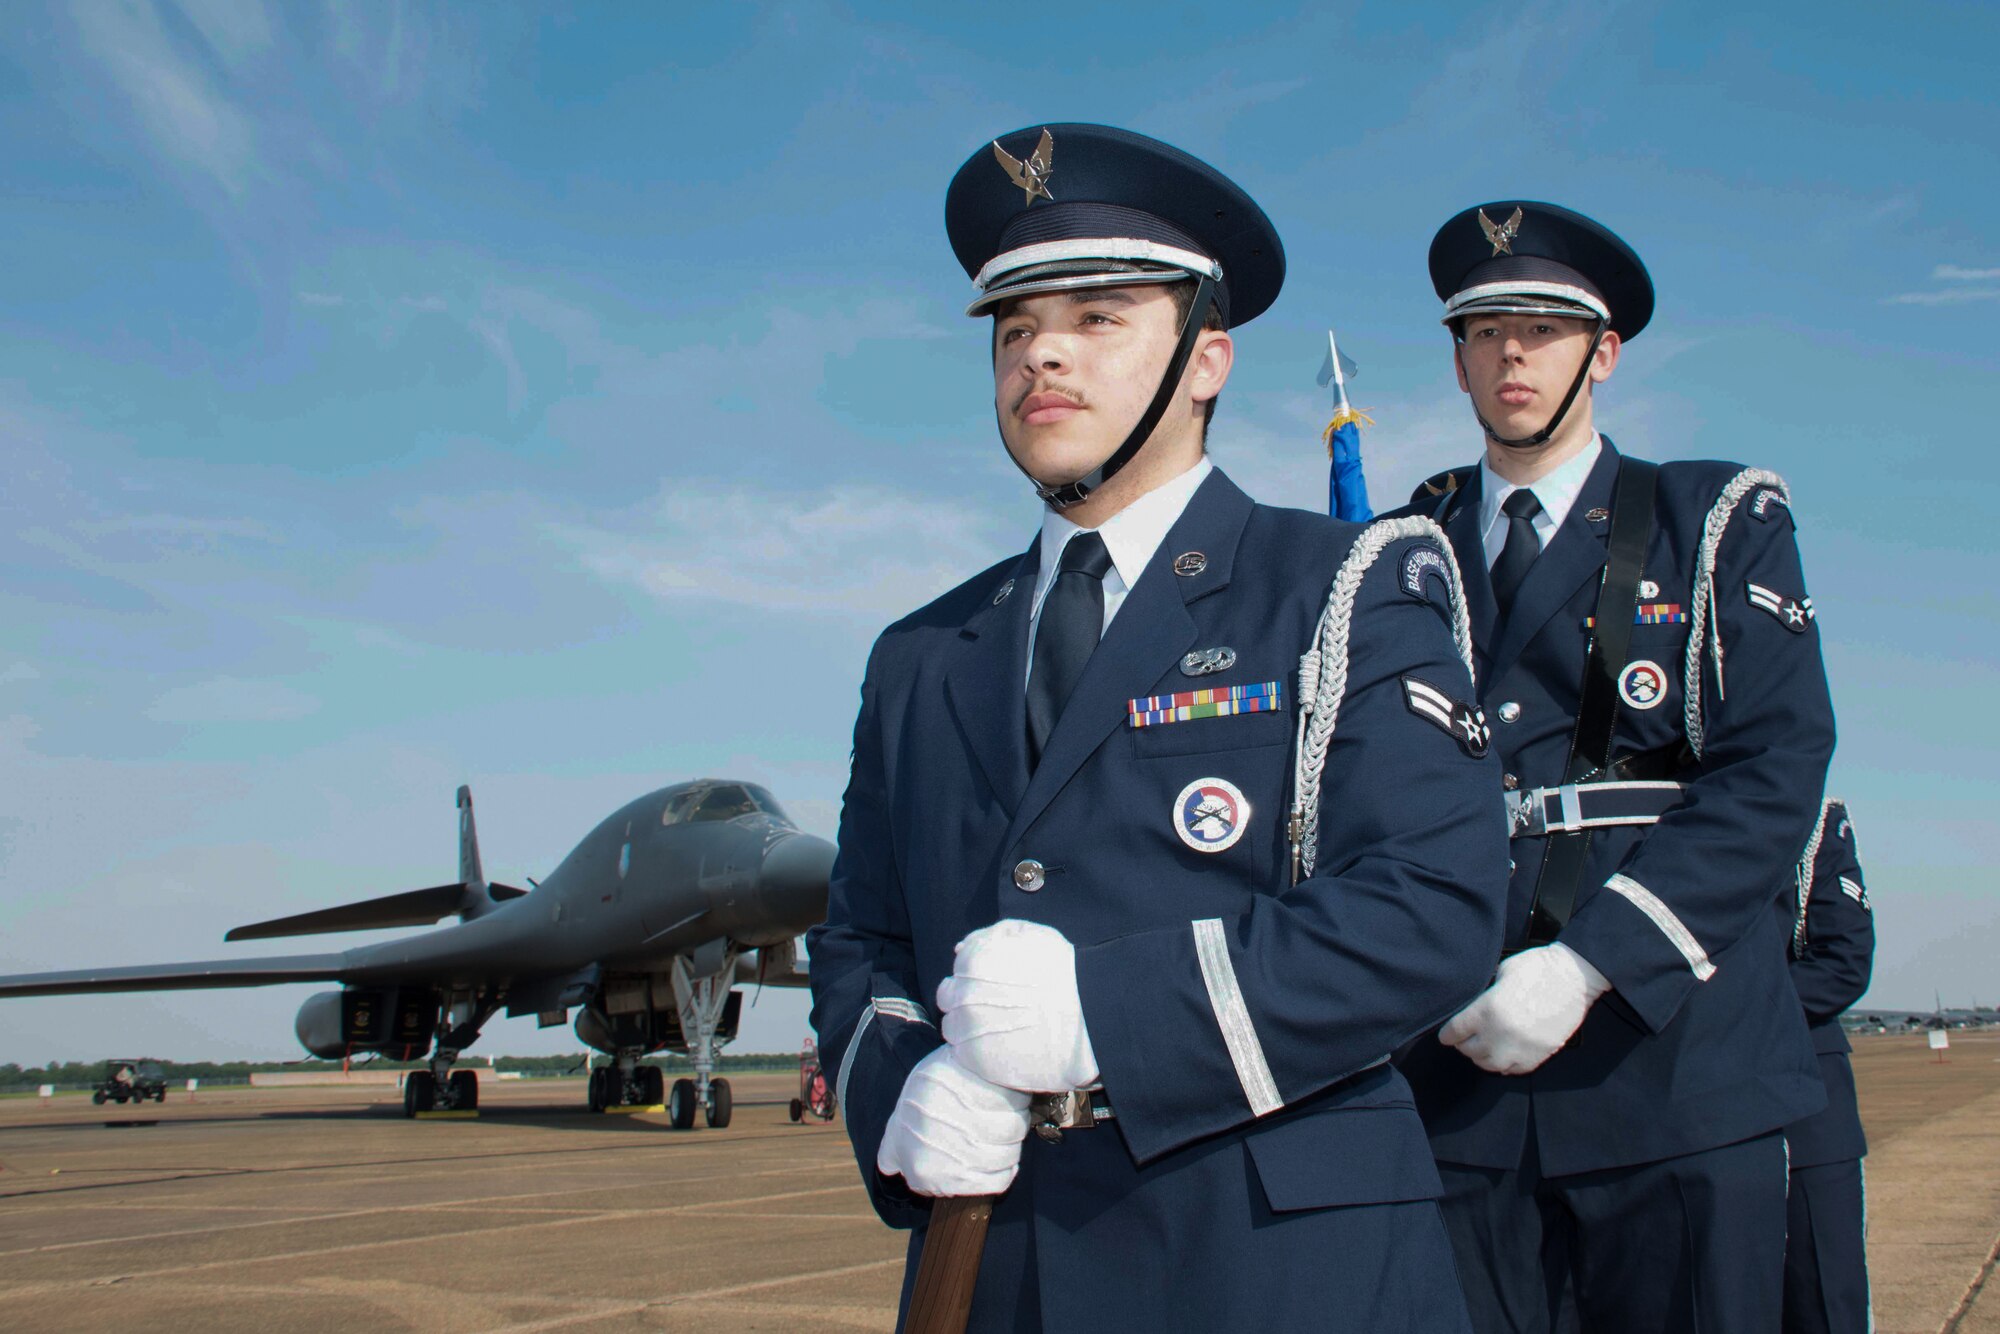 Members of the honor guard at Barksdale Air Force Base, Louisiana  stand ready to present the Colors during a civic leader social here May 10, 2018.  The event allowed leadership from Barksdale to thank civic leaders from across the Shreveport and Bossier City area for their ongoing support of the base and its mission. (U.S. Air Forc photo by Master Sgt. Ted Daigle/released)